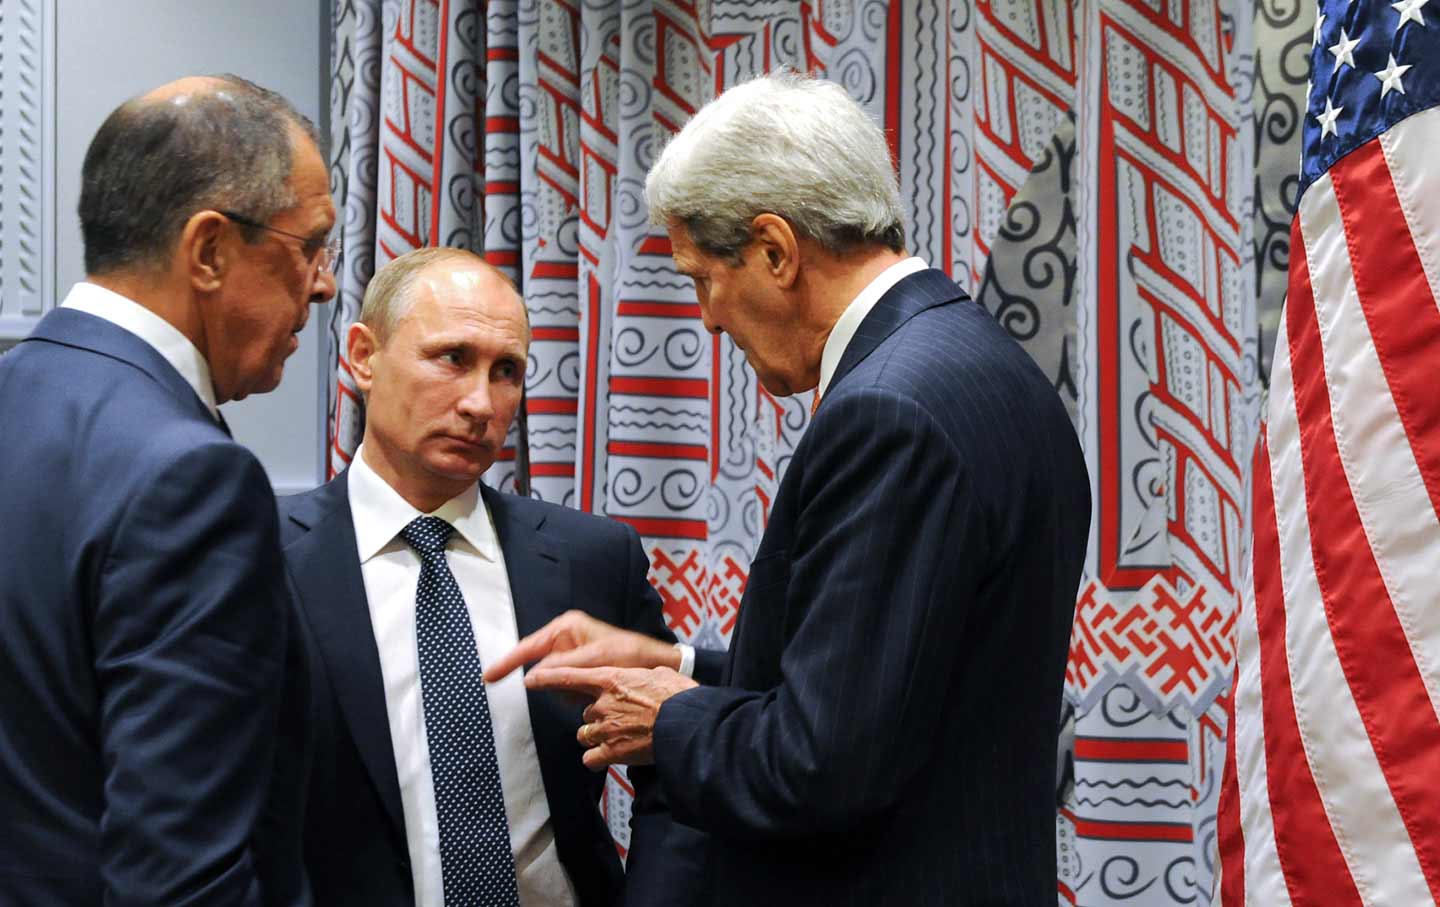 Russian President Vladimir Putin, Russian Foreign Minister Sergey Lavrov, and US Secretary of State John Kerry